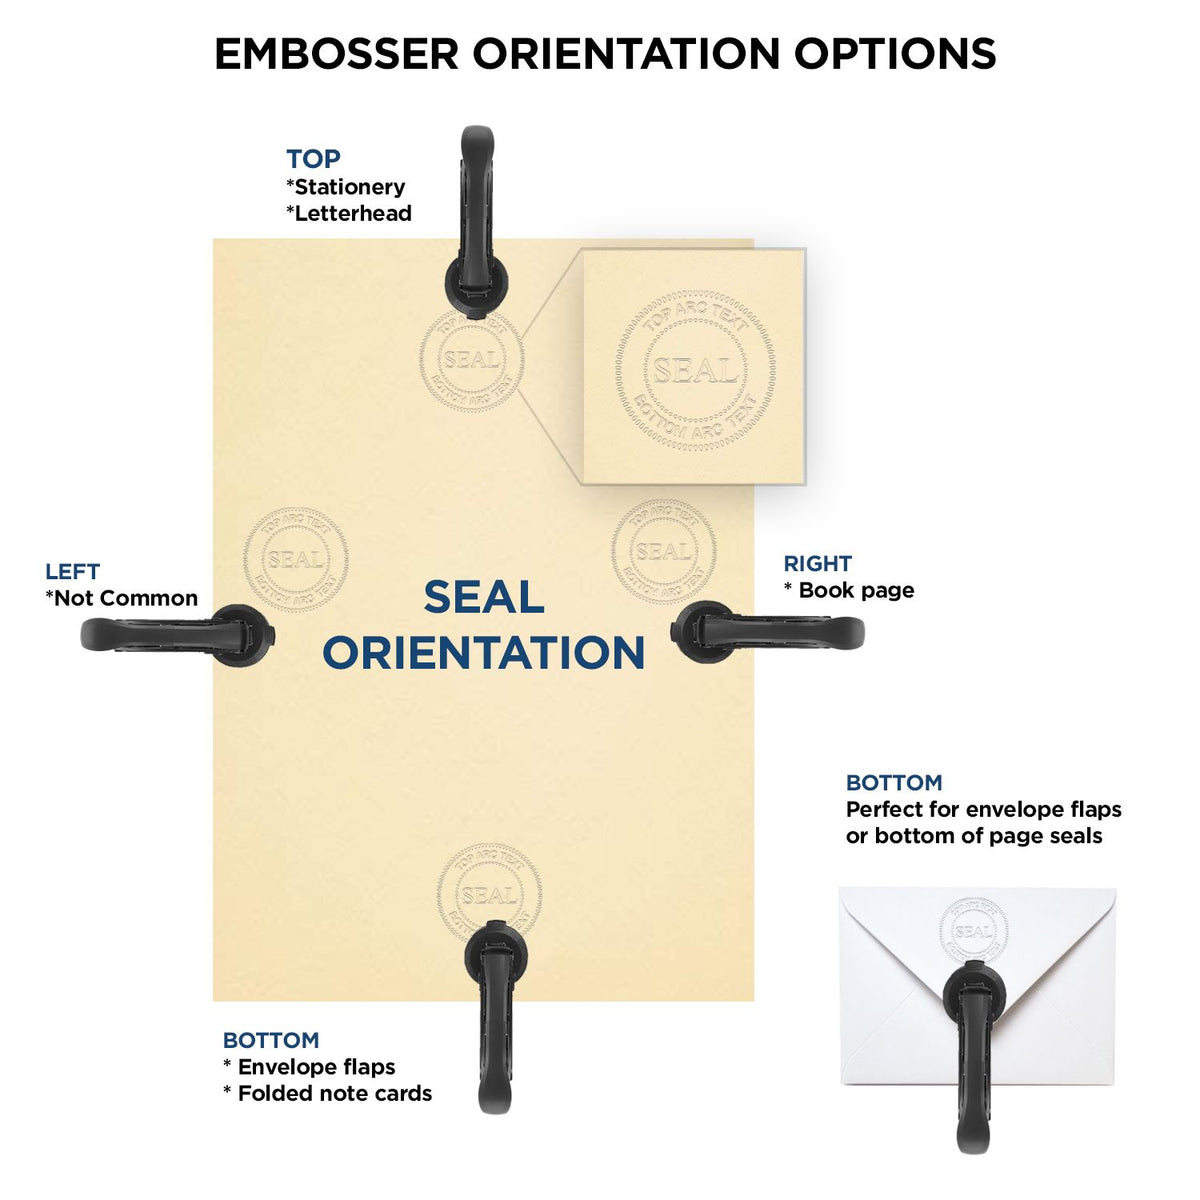 An infographic for the Handheld Mississippi Professional Geologist Embosser showing embosser orientation, this is showing examples of a top, bottom, right and left insert.